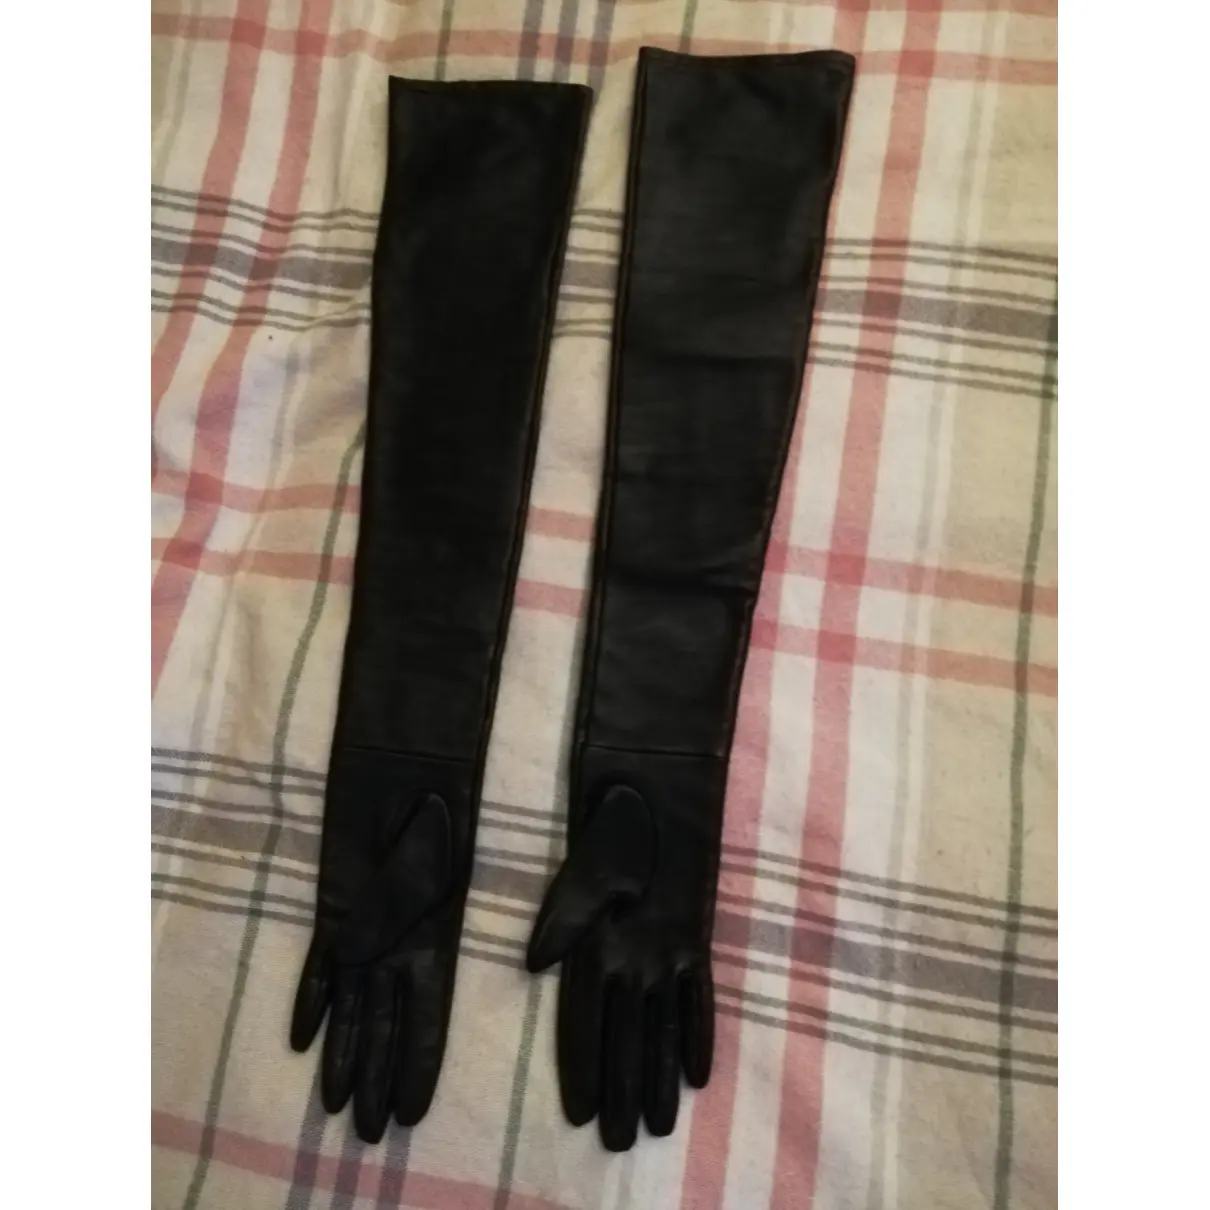 Buy Kenzo x H&M Leather long gloves online